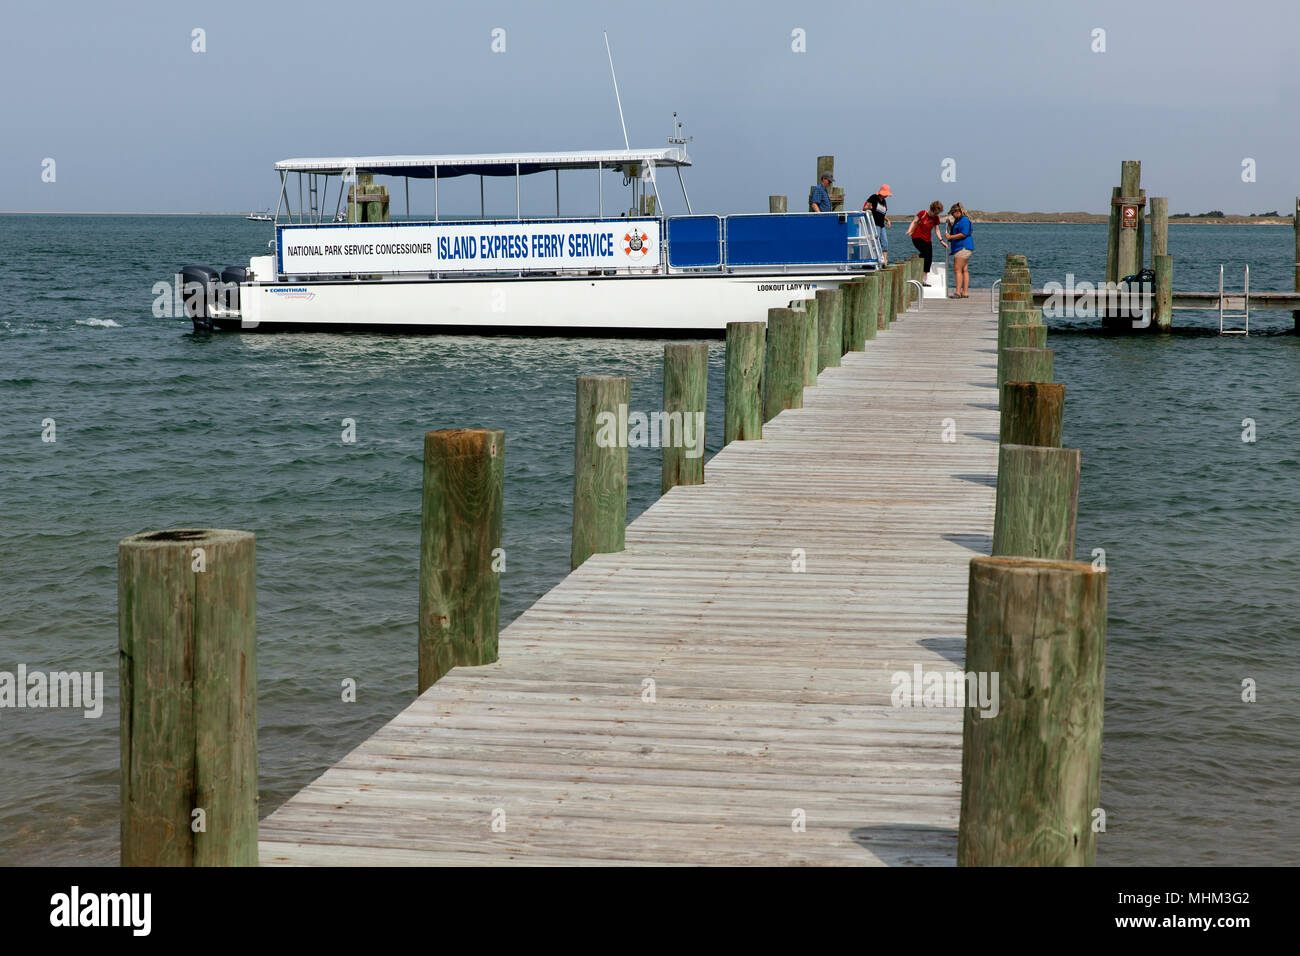 NC01546-00...North Carolina - Isola Express ferry boat forma Harkers isola in atterraggio a Cape Lookout Lighthouse Dock sul nucleo del Sud banche, Cape Lookout Foto Stock